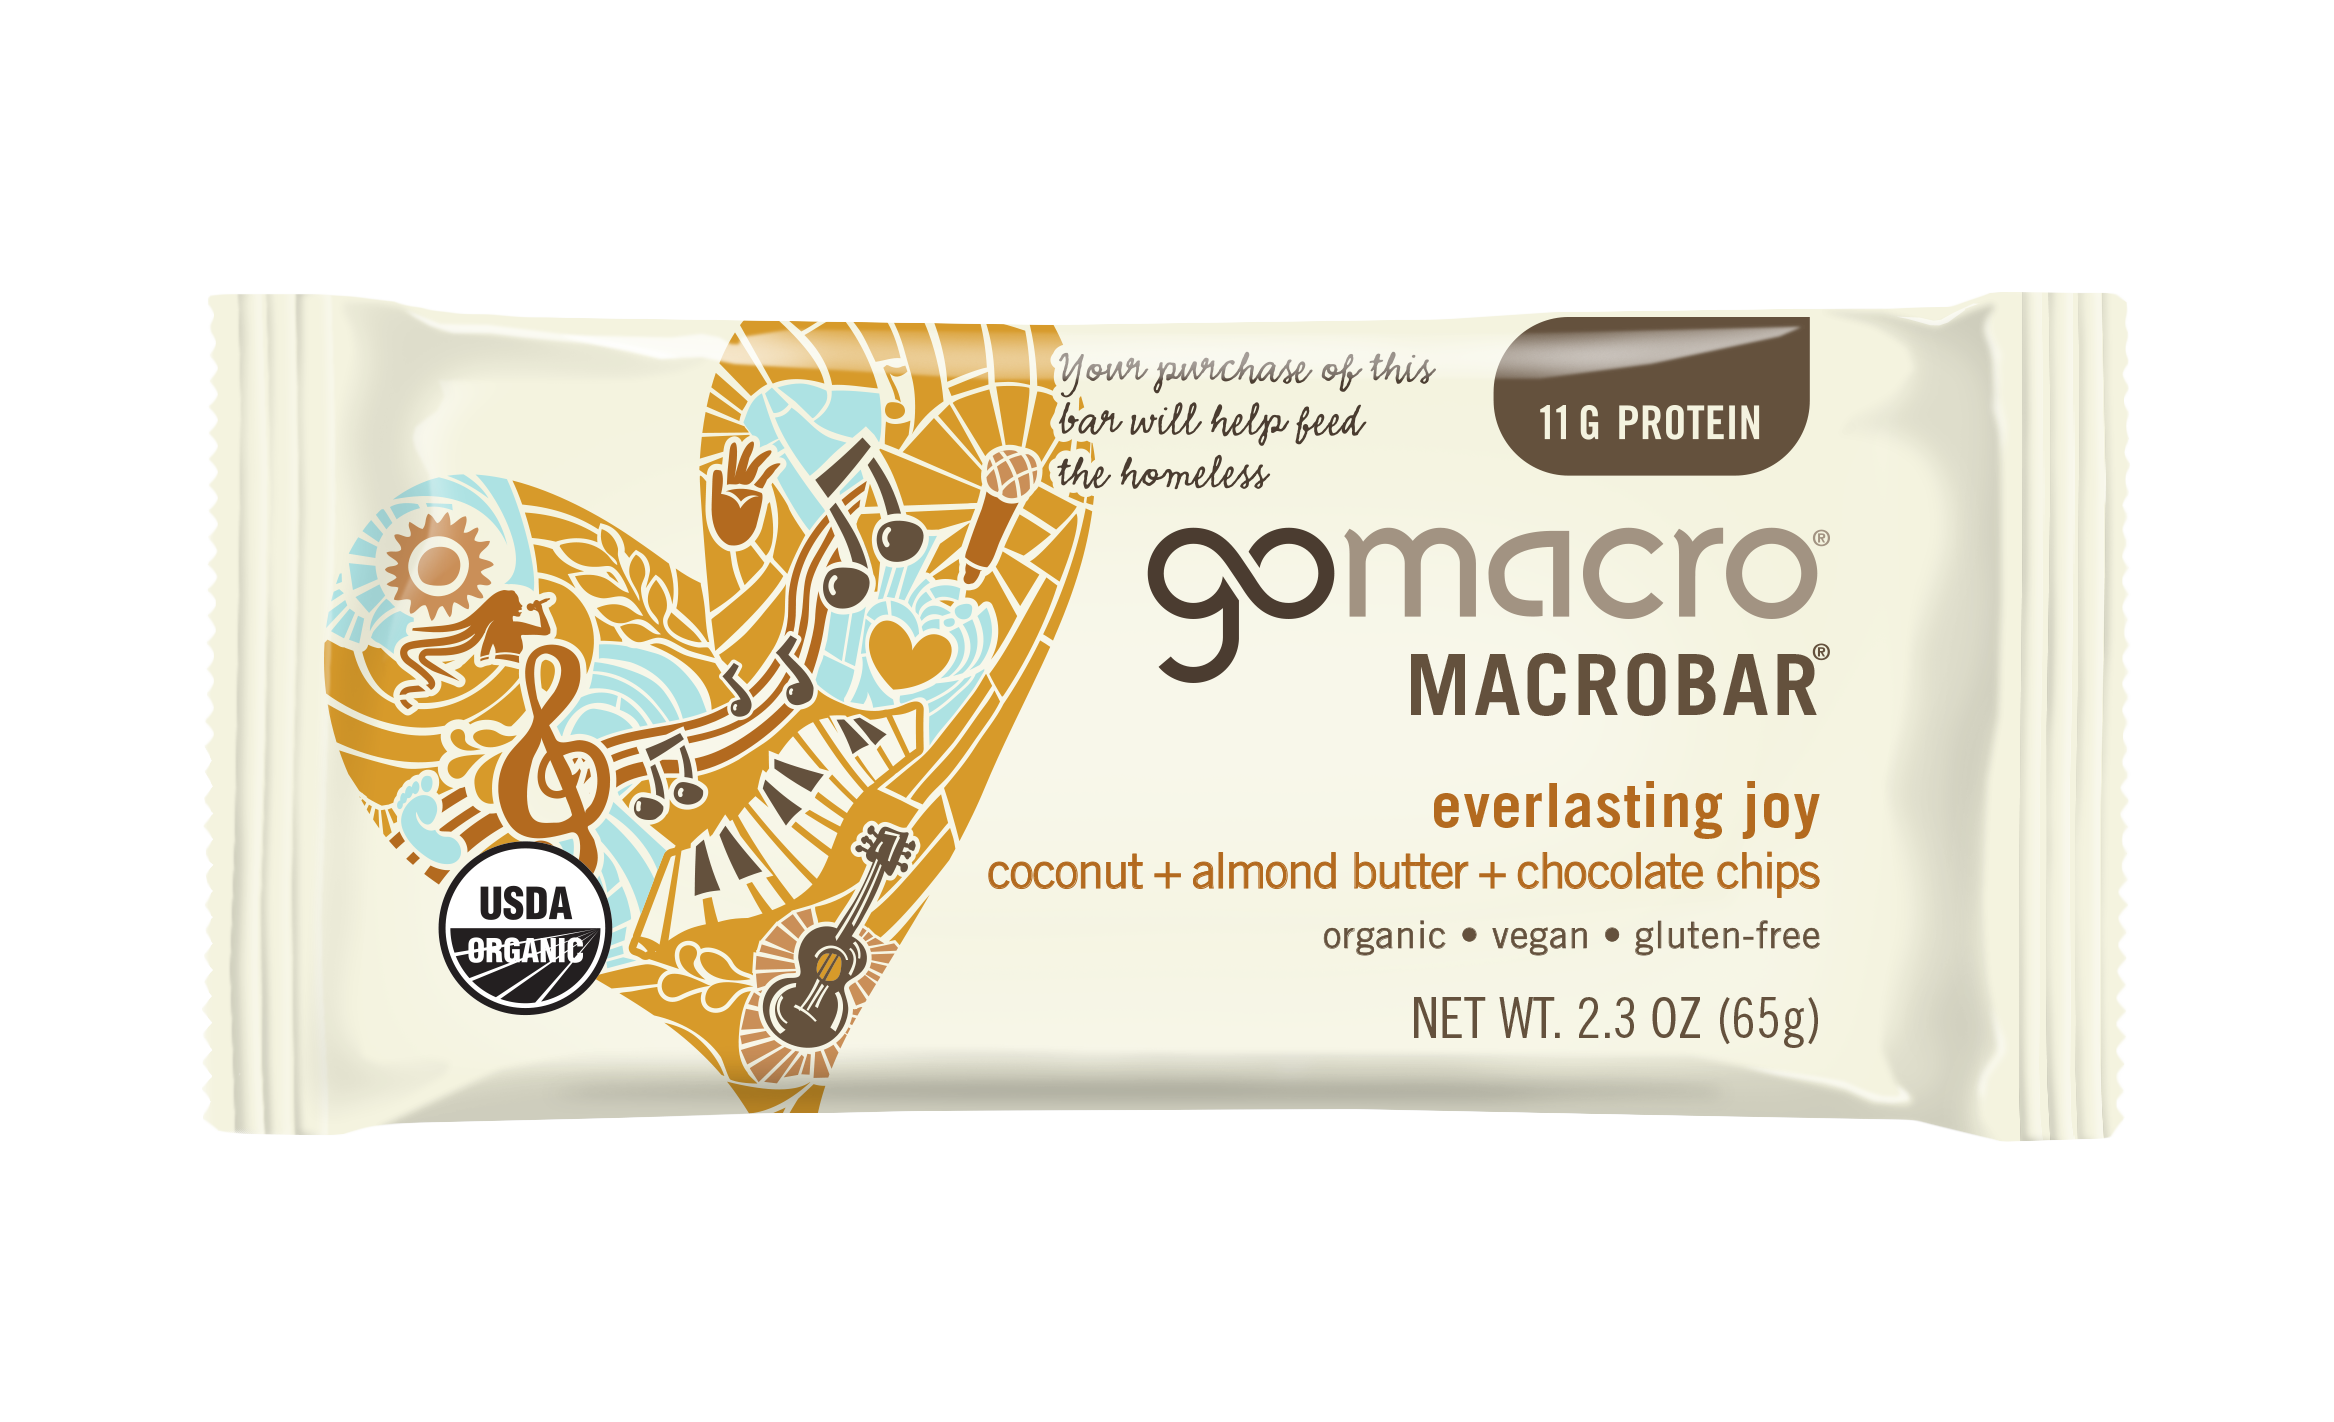 Coconut + Almond Butter + Chocolate Chips MacroBar